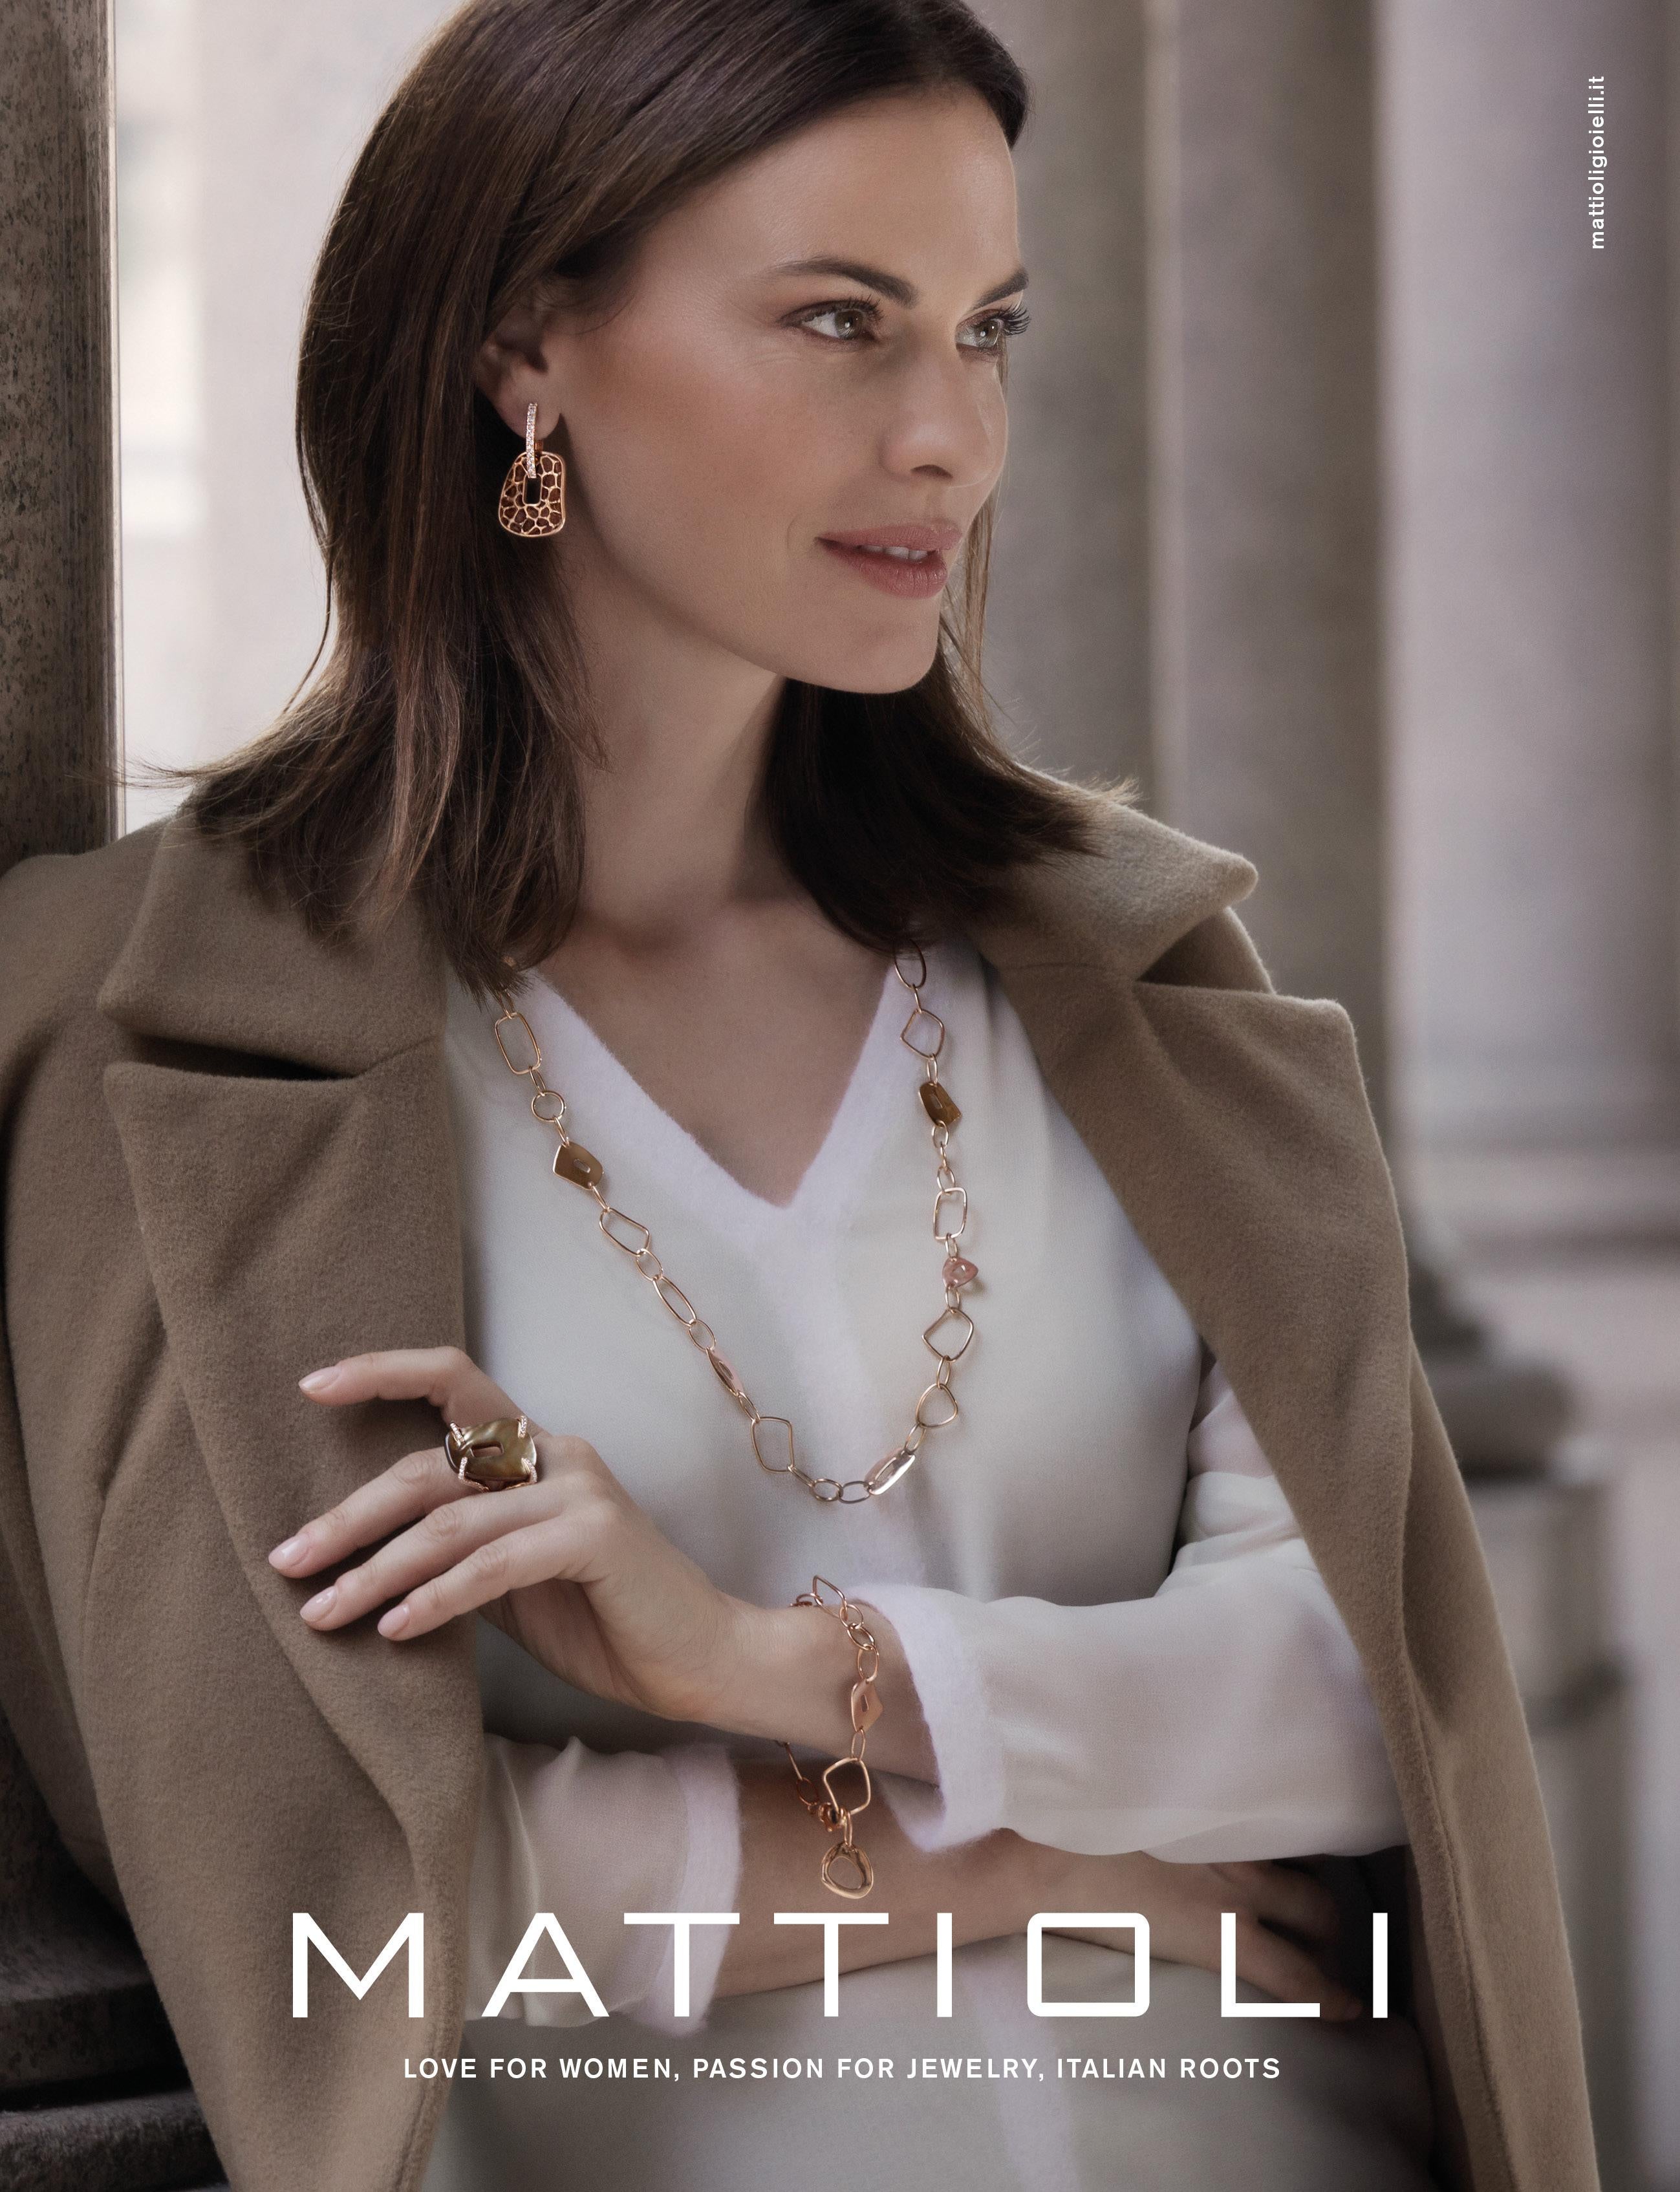 Mattioli Puzzle Collection 18 Karat Rose Gold Necklace
90 cm - 35.4 in
Available on request in other mother of pearl colours, in yellow gold or white gold 
Important information for this ORDER !
Request availability if in stock inmediate shipping
If